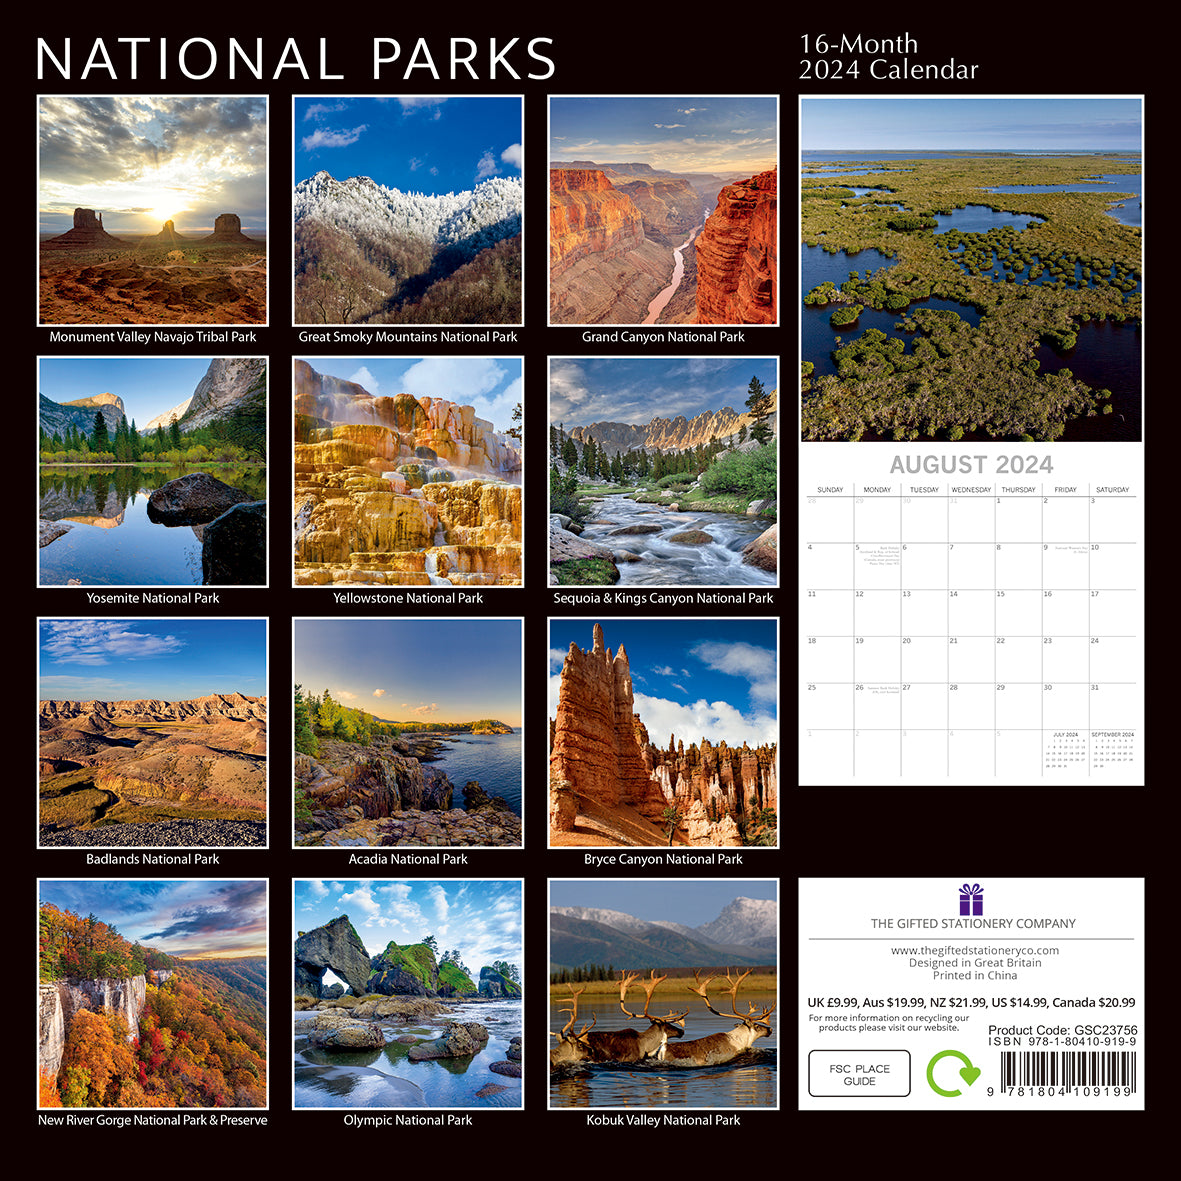 National Parks USA 2024 Square Wall Calendar 16 Months Premium Planner New Year